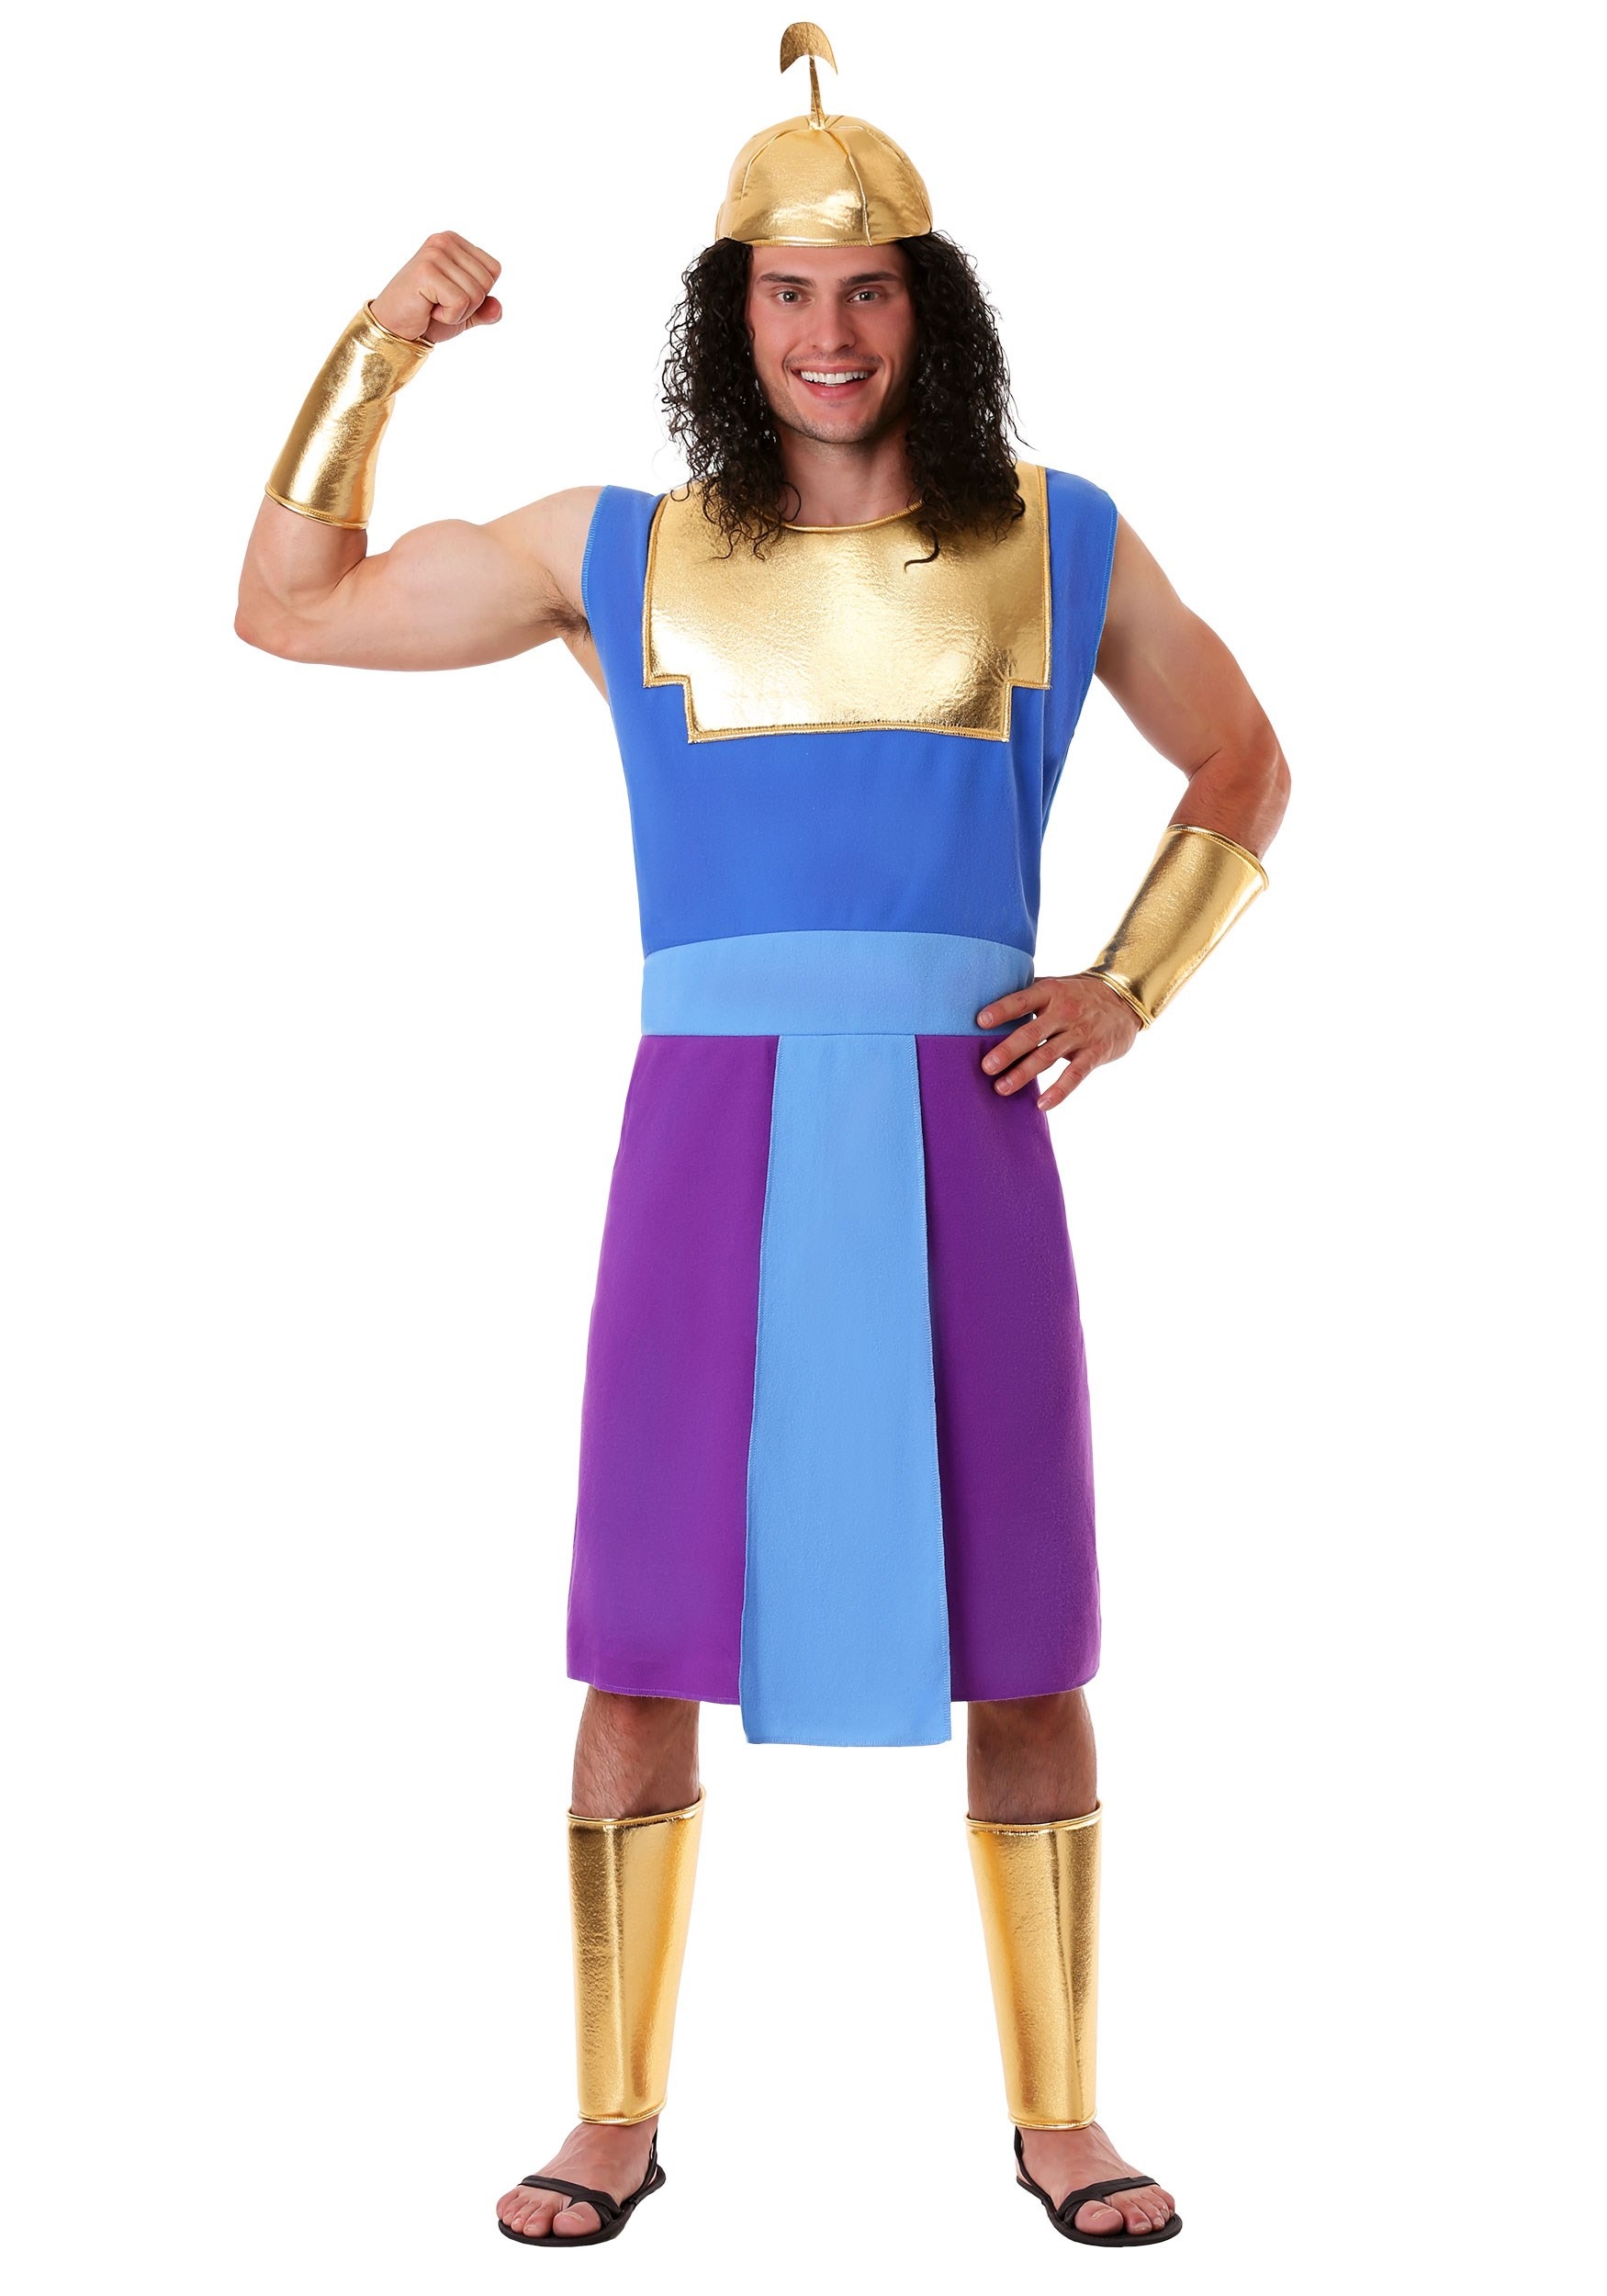 Kronk Costume from Emperor's New Groove